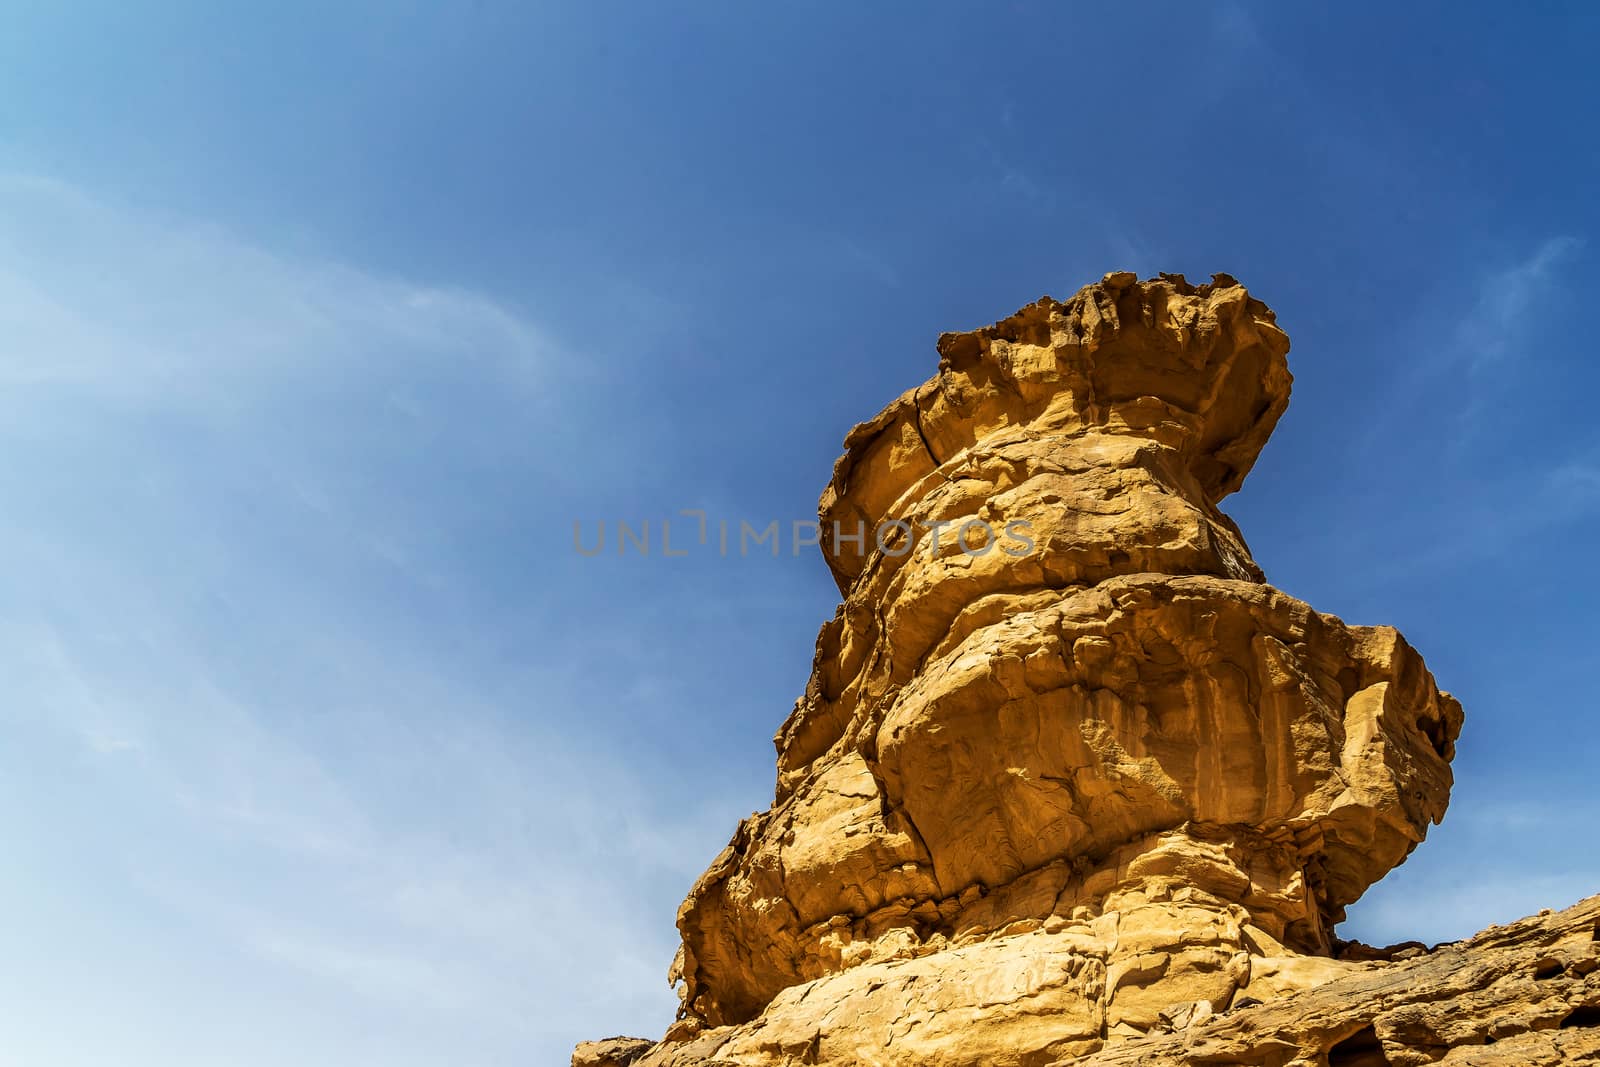 Impressive solitary rock with Eolian erosion marks in the desert of Wadi Rum, Jordan by geogif